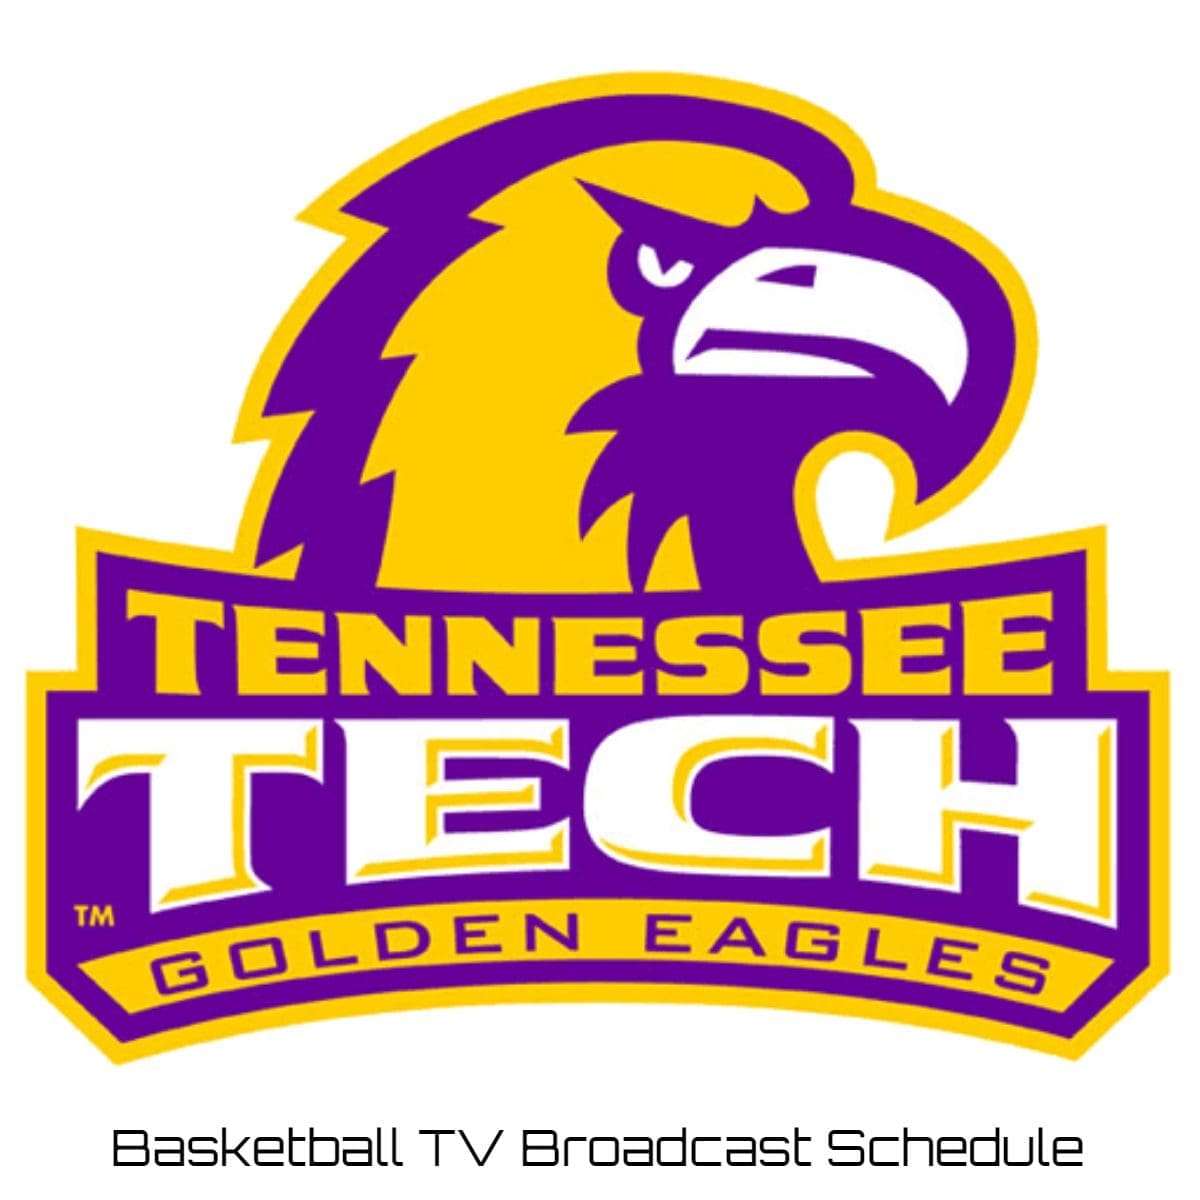 Tennessee Tech Golden Eagles Basketball TV Broadcast Schedule